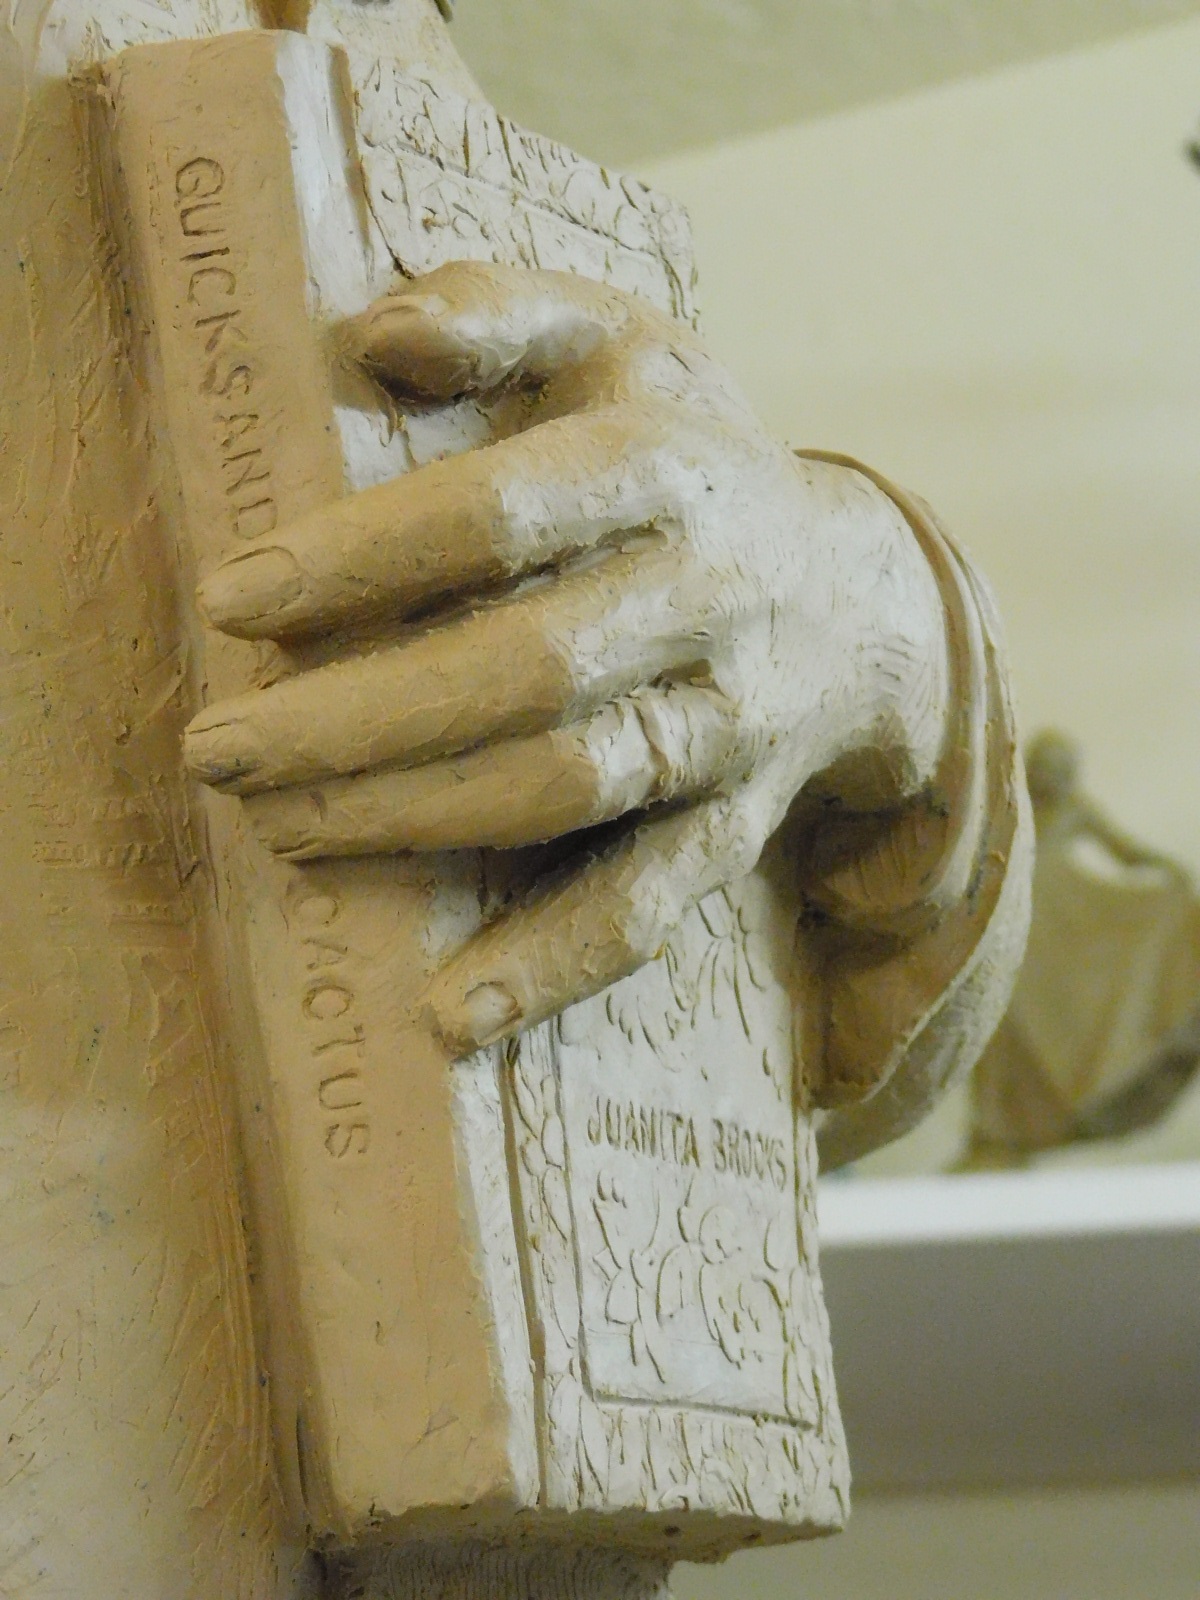 The hand & book on the clay model of the Juanita Brooks statue